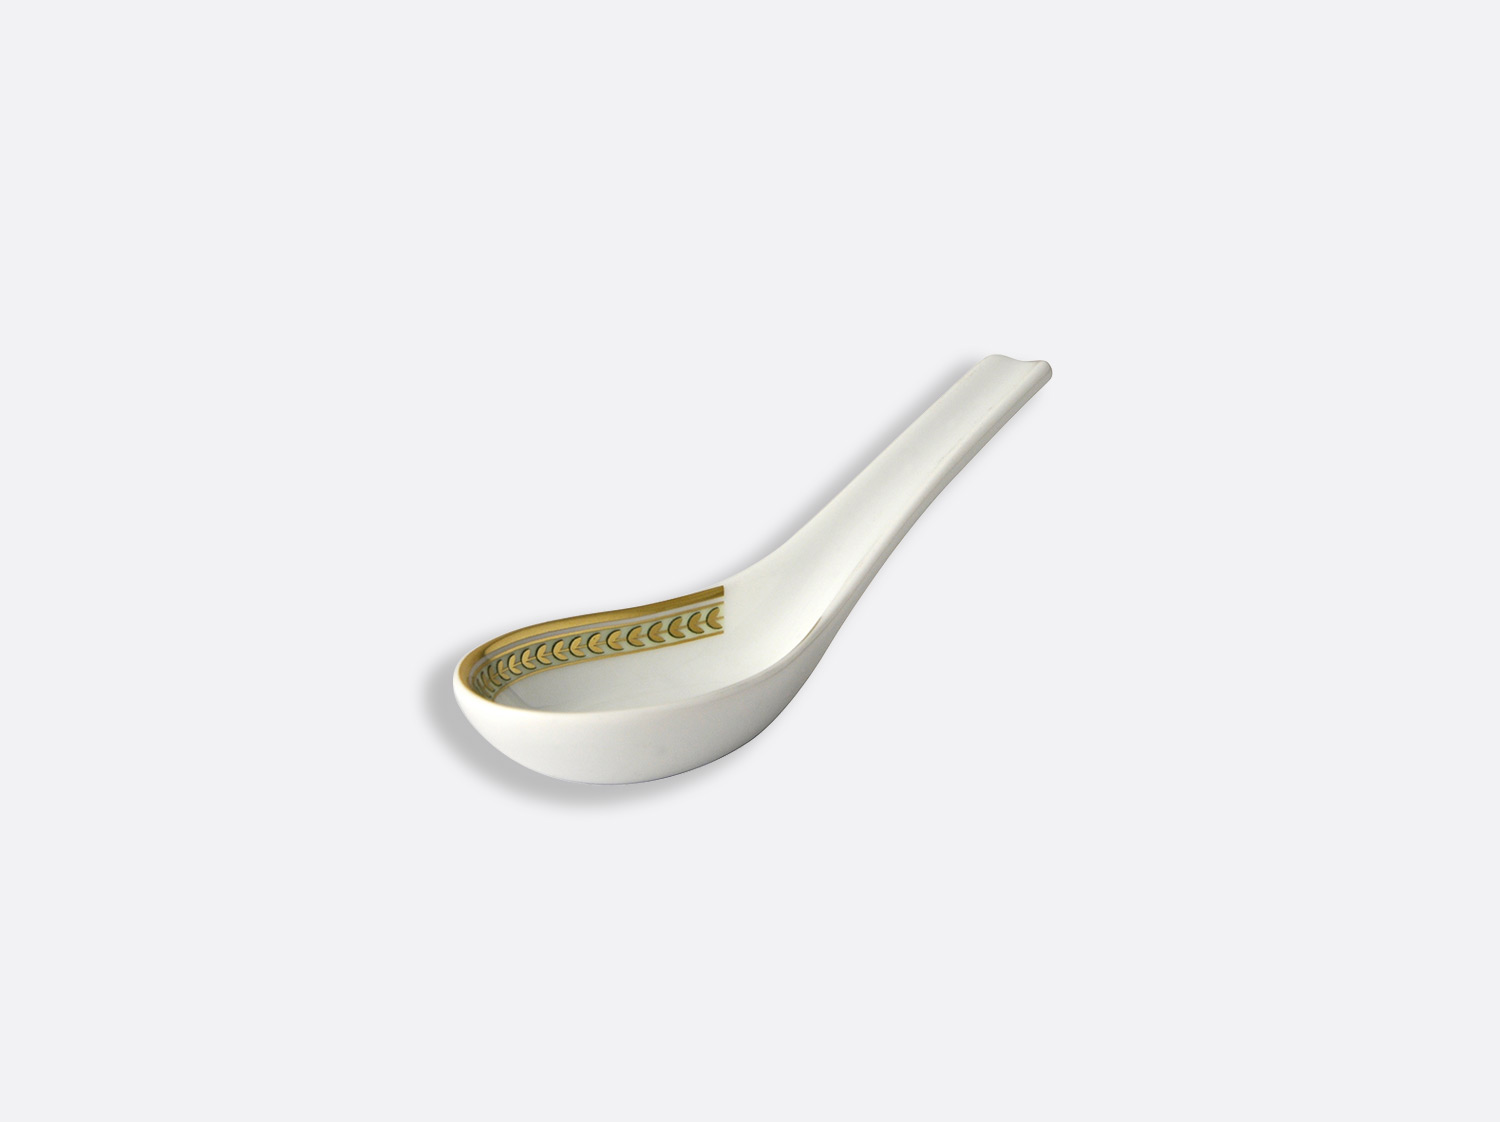 China Chinese spoon of the collection Constance | Bernardaud